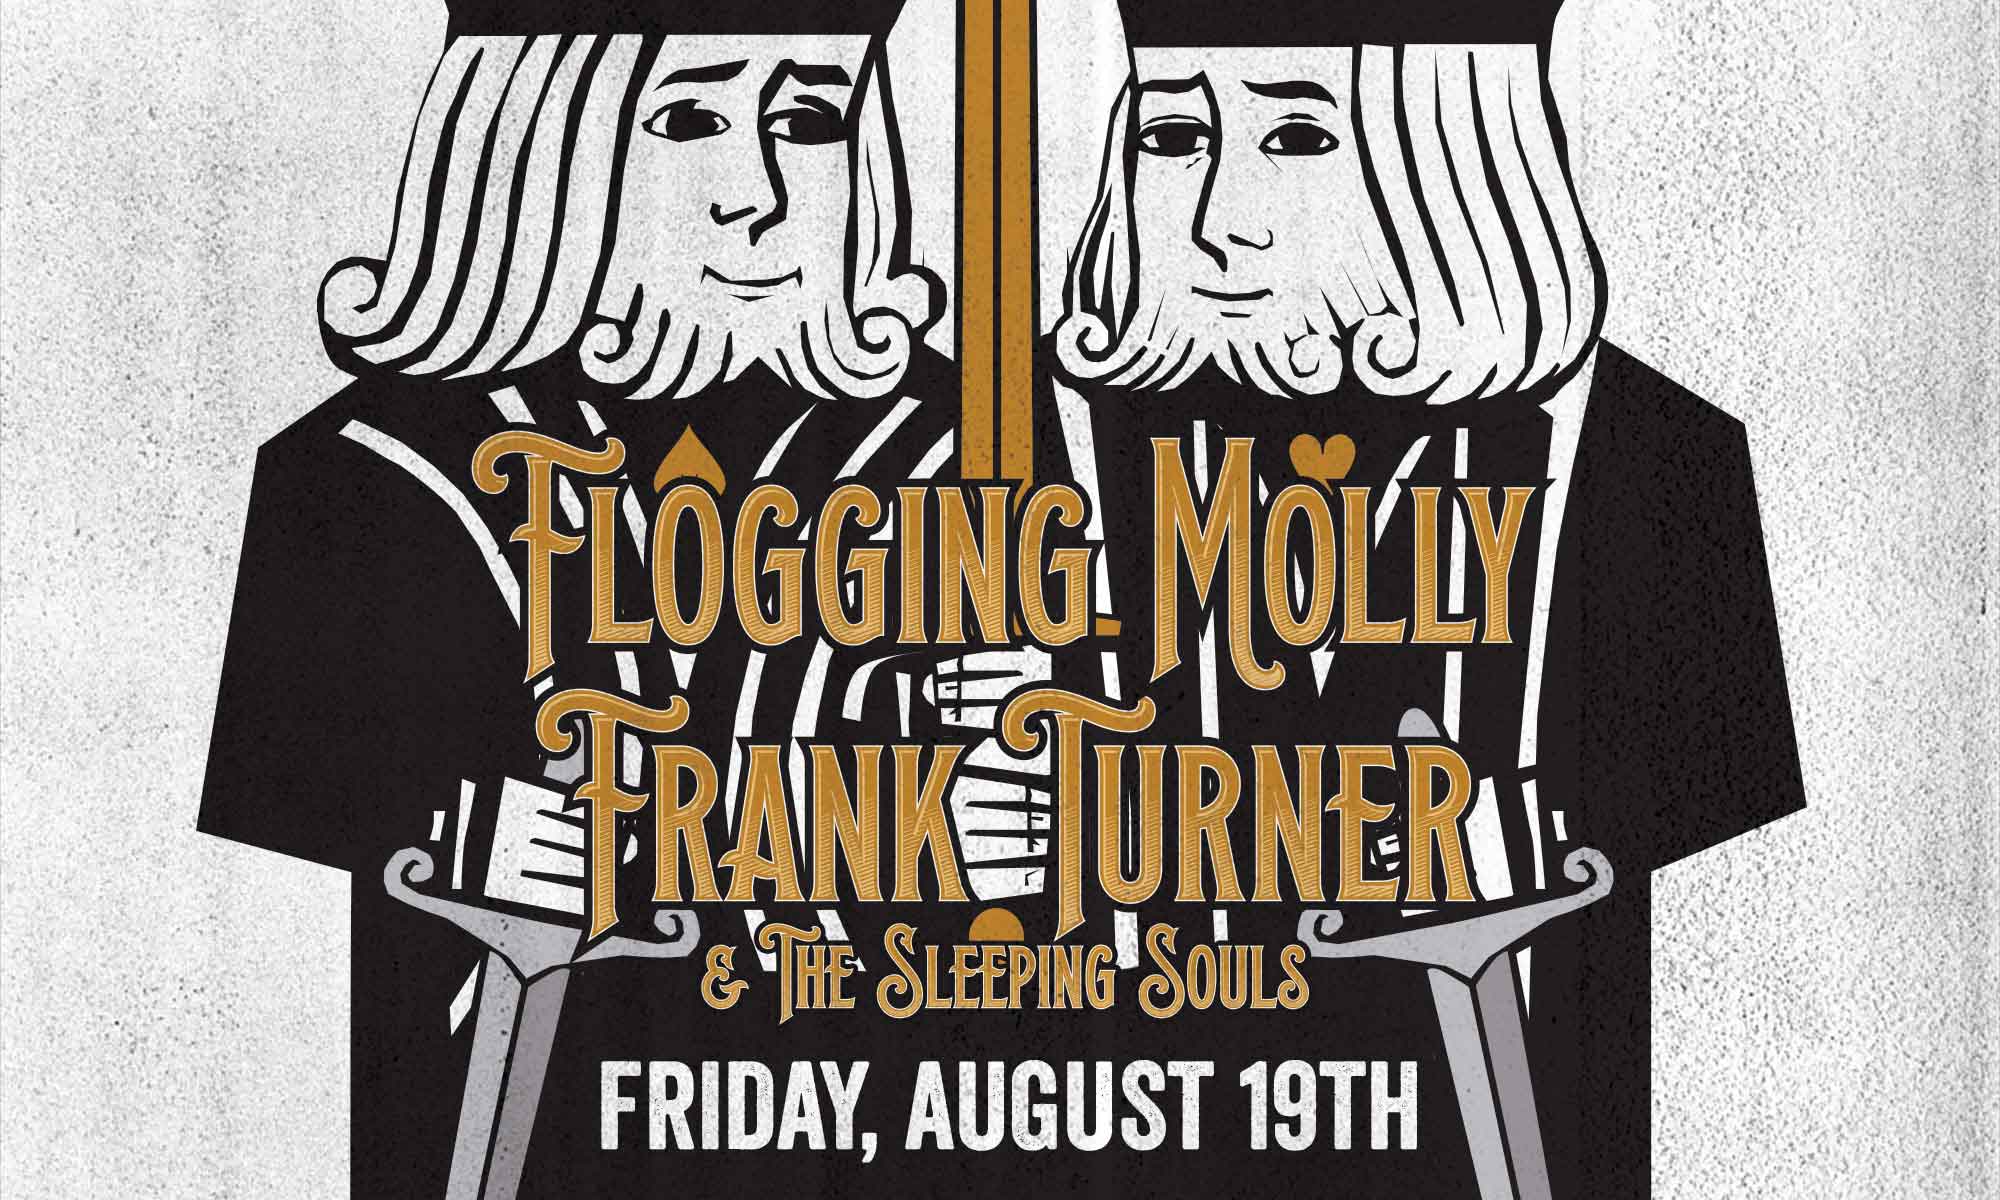 Flogging Molly at Coney Island Amphitheater on 08-19916